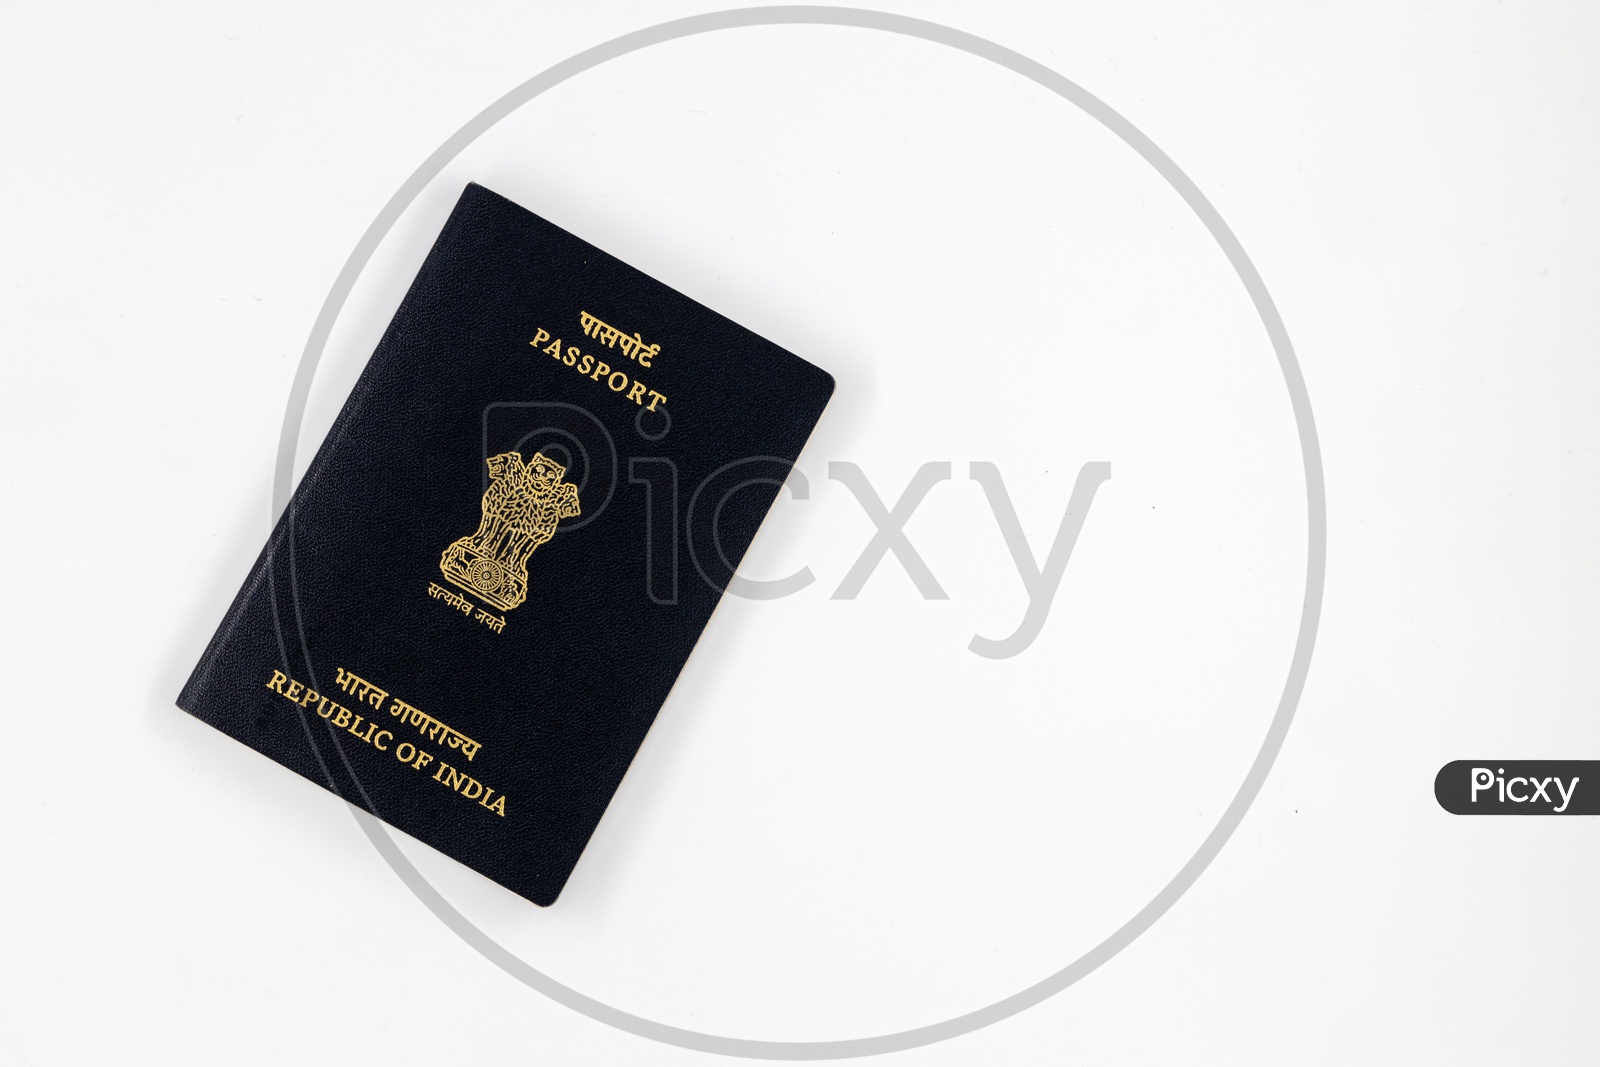 Indian Passport  on an Isolated White Background